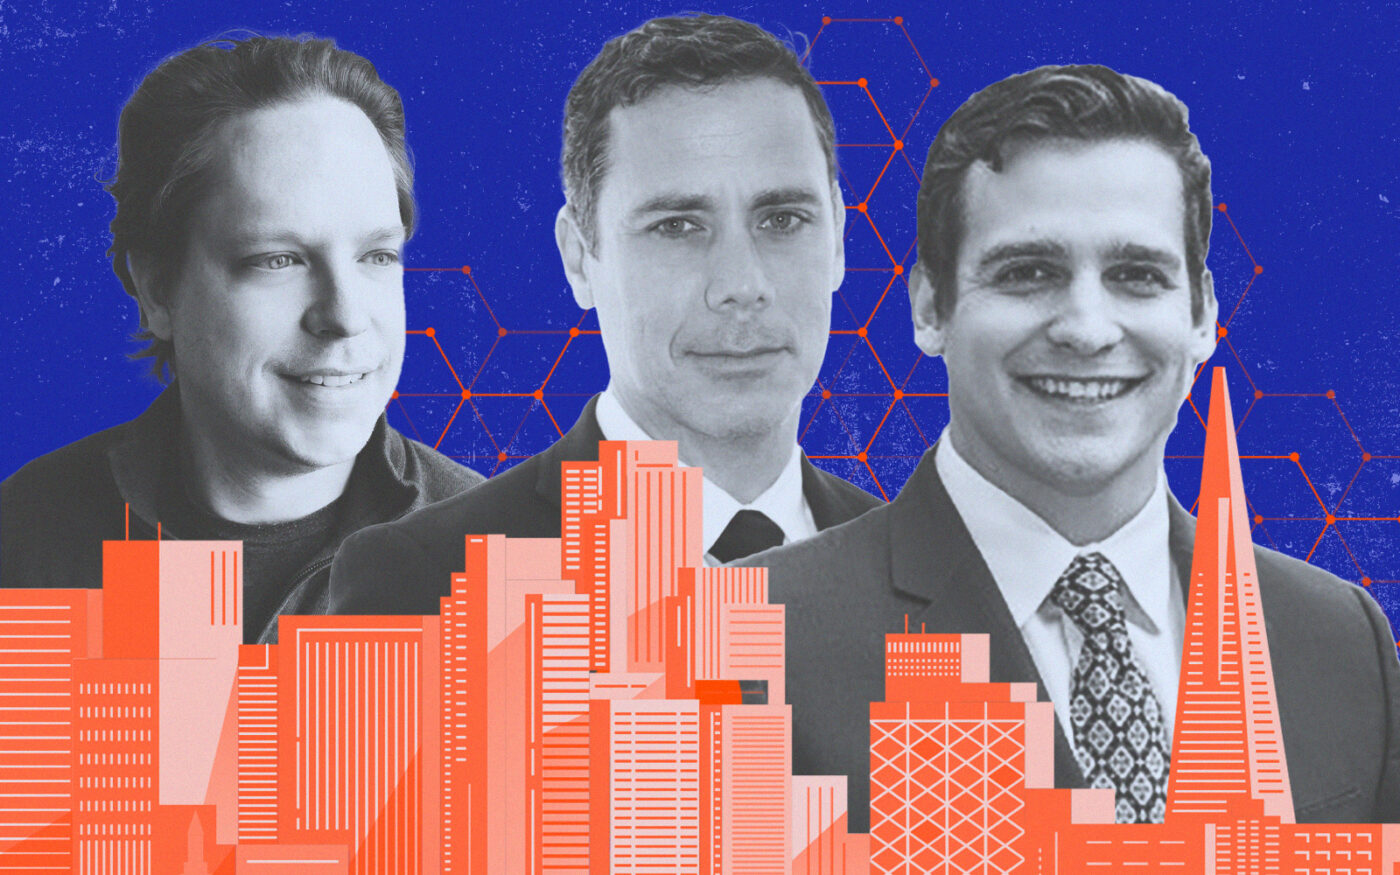 Colliers' Derek Daniels, JLL's Alexander Quinn and Avison Young's William O’Daly